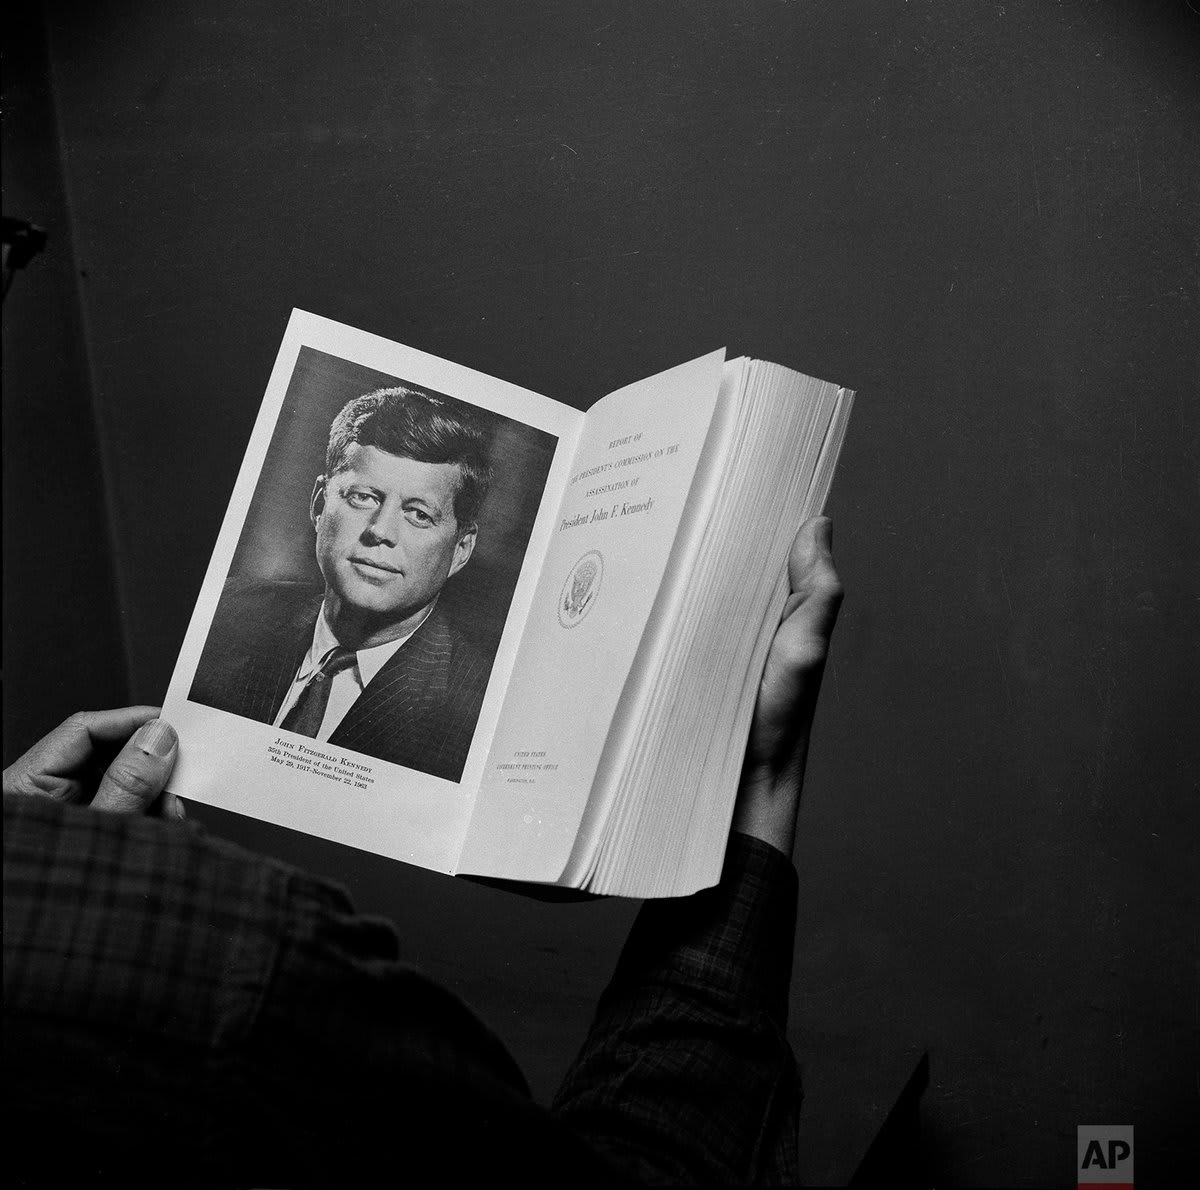 OTD in 1964, the government publicly released the report of the Warren Commission, which concluded that Lee Harvey Oswald had acted alone in assassinating President John F. Kennedy. Photo shows the inside cover of the Warren Commission report, a two-inch thick, 888-page report.